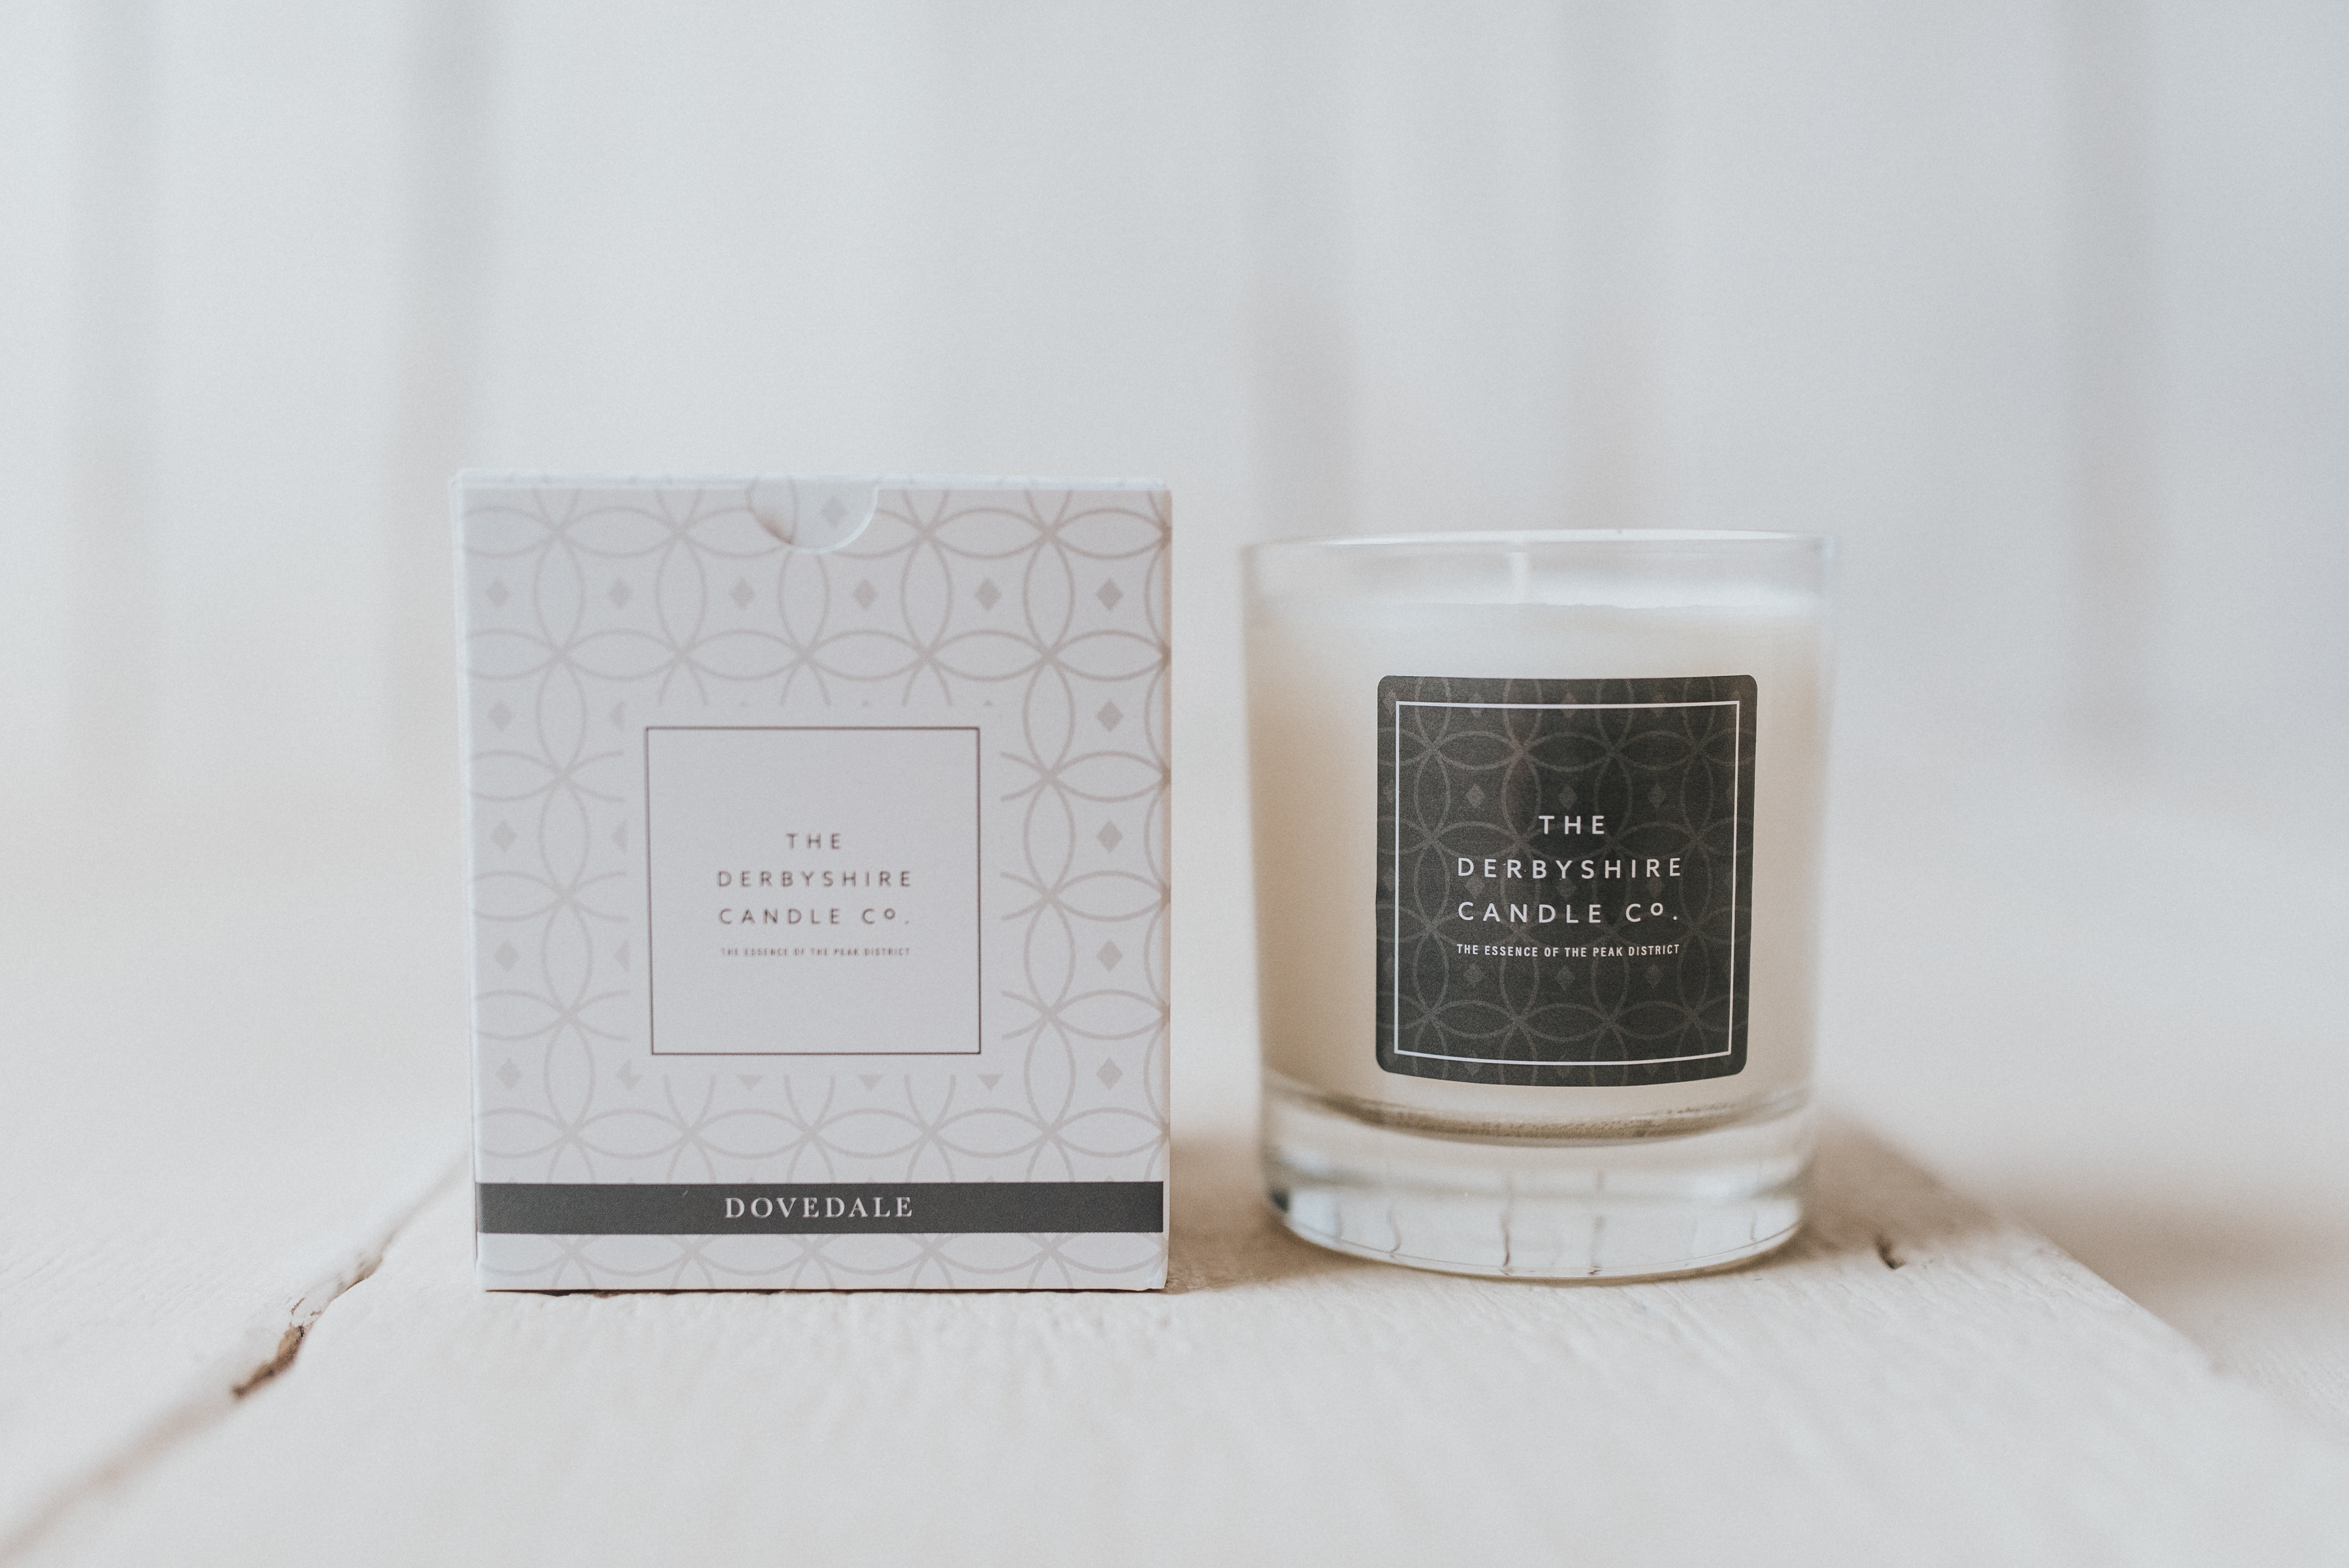 A fresh pine forest smell with top notes of eucalyptus.